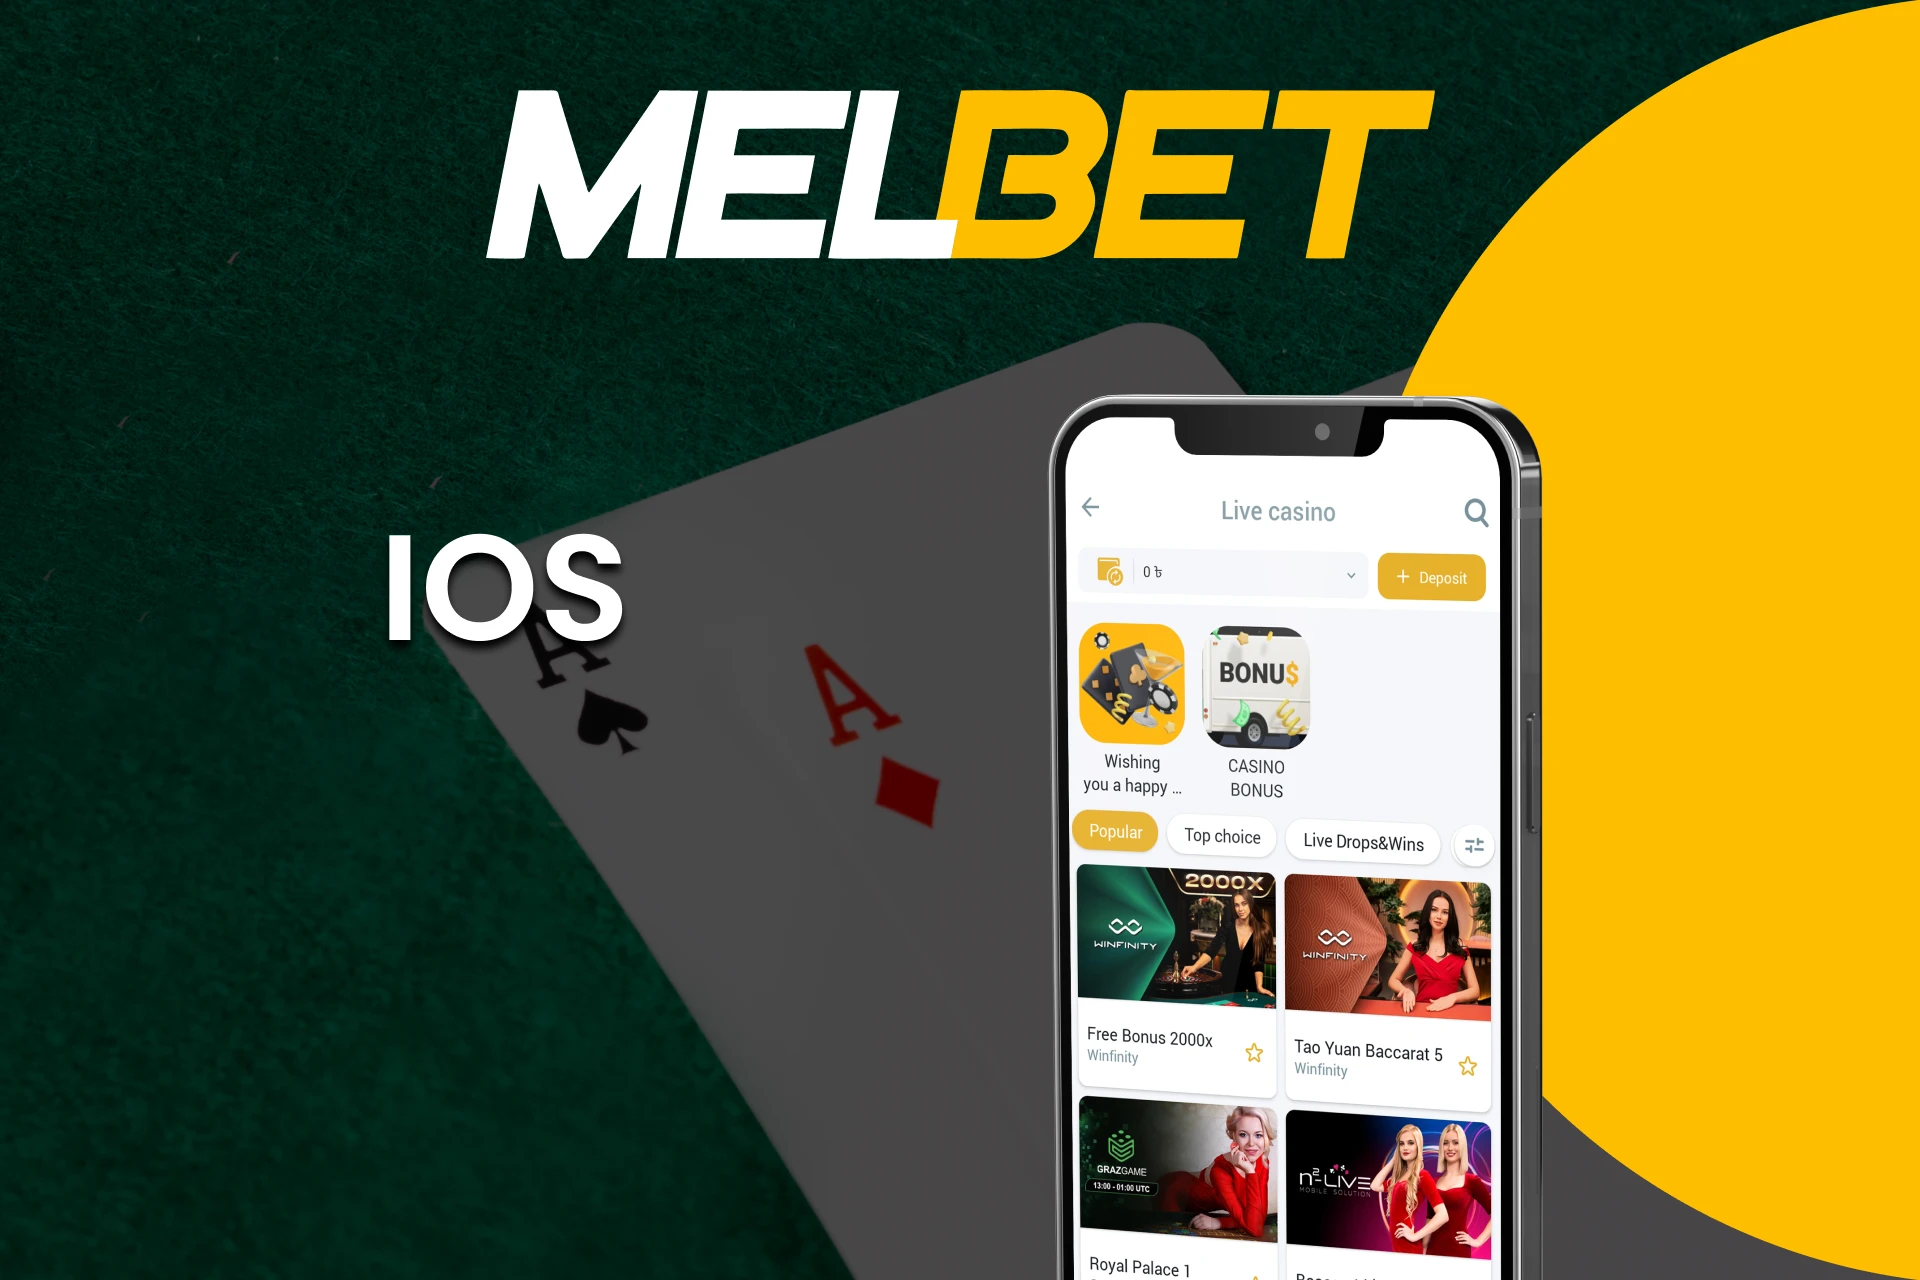 Download the Melbet app on iOS to play Live Casino.